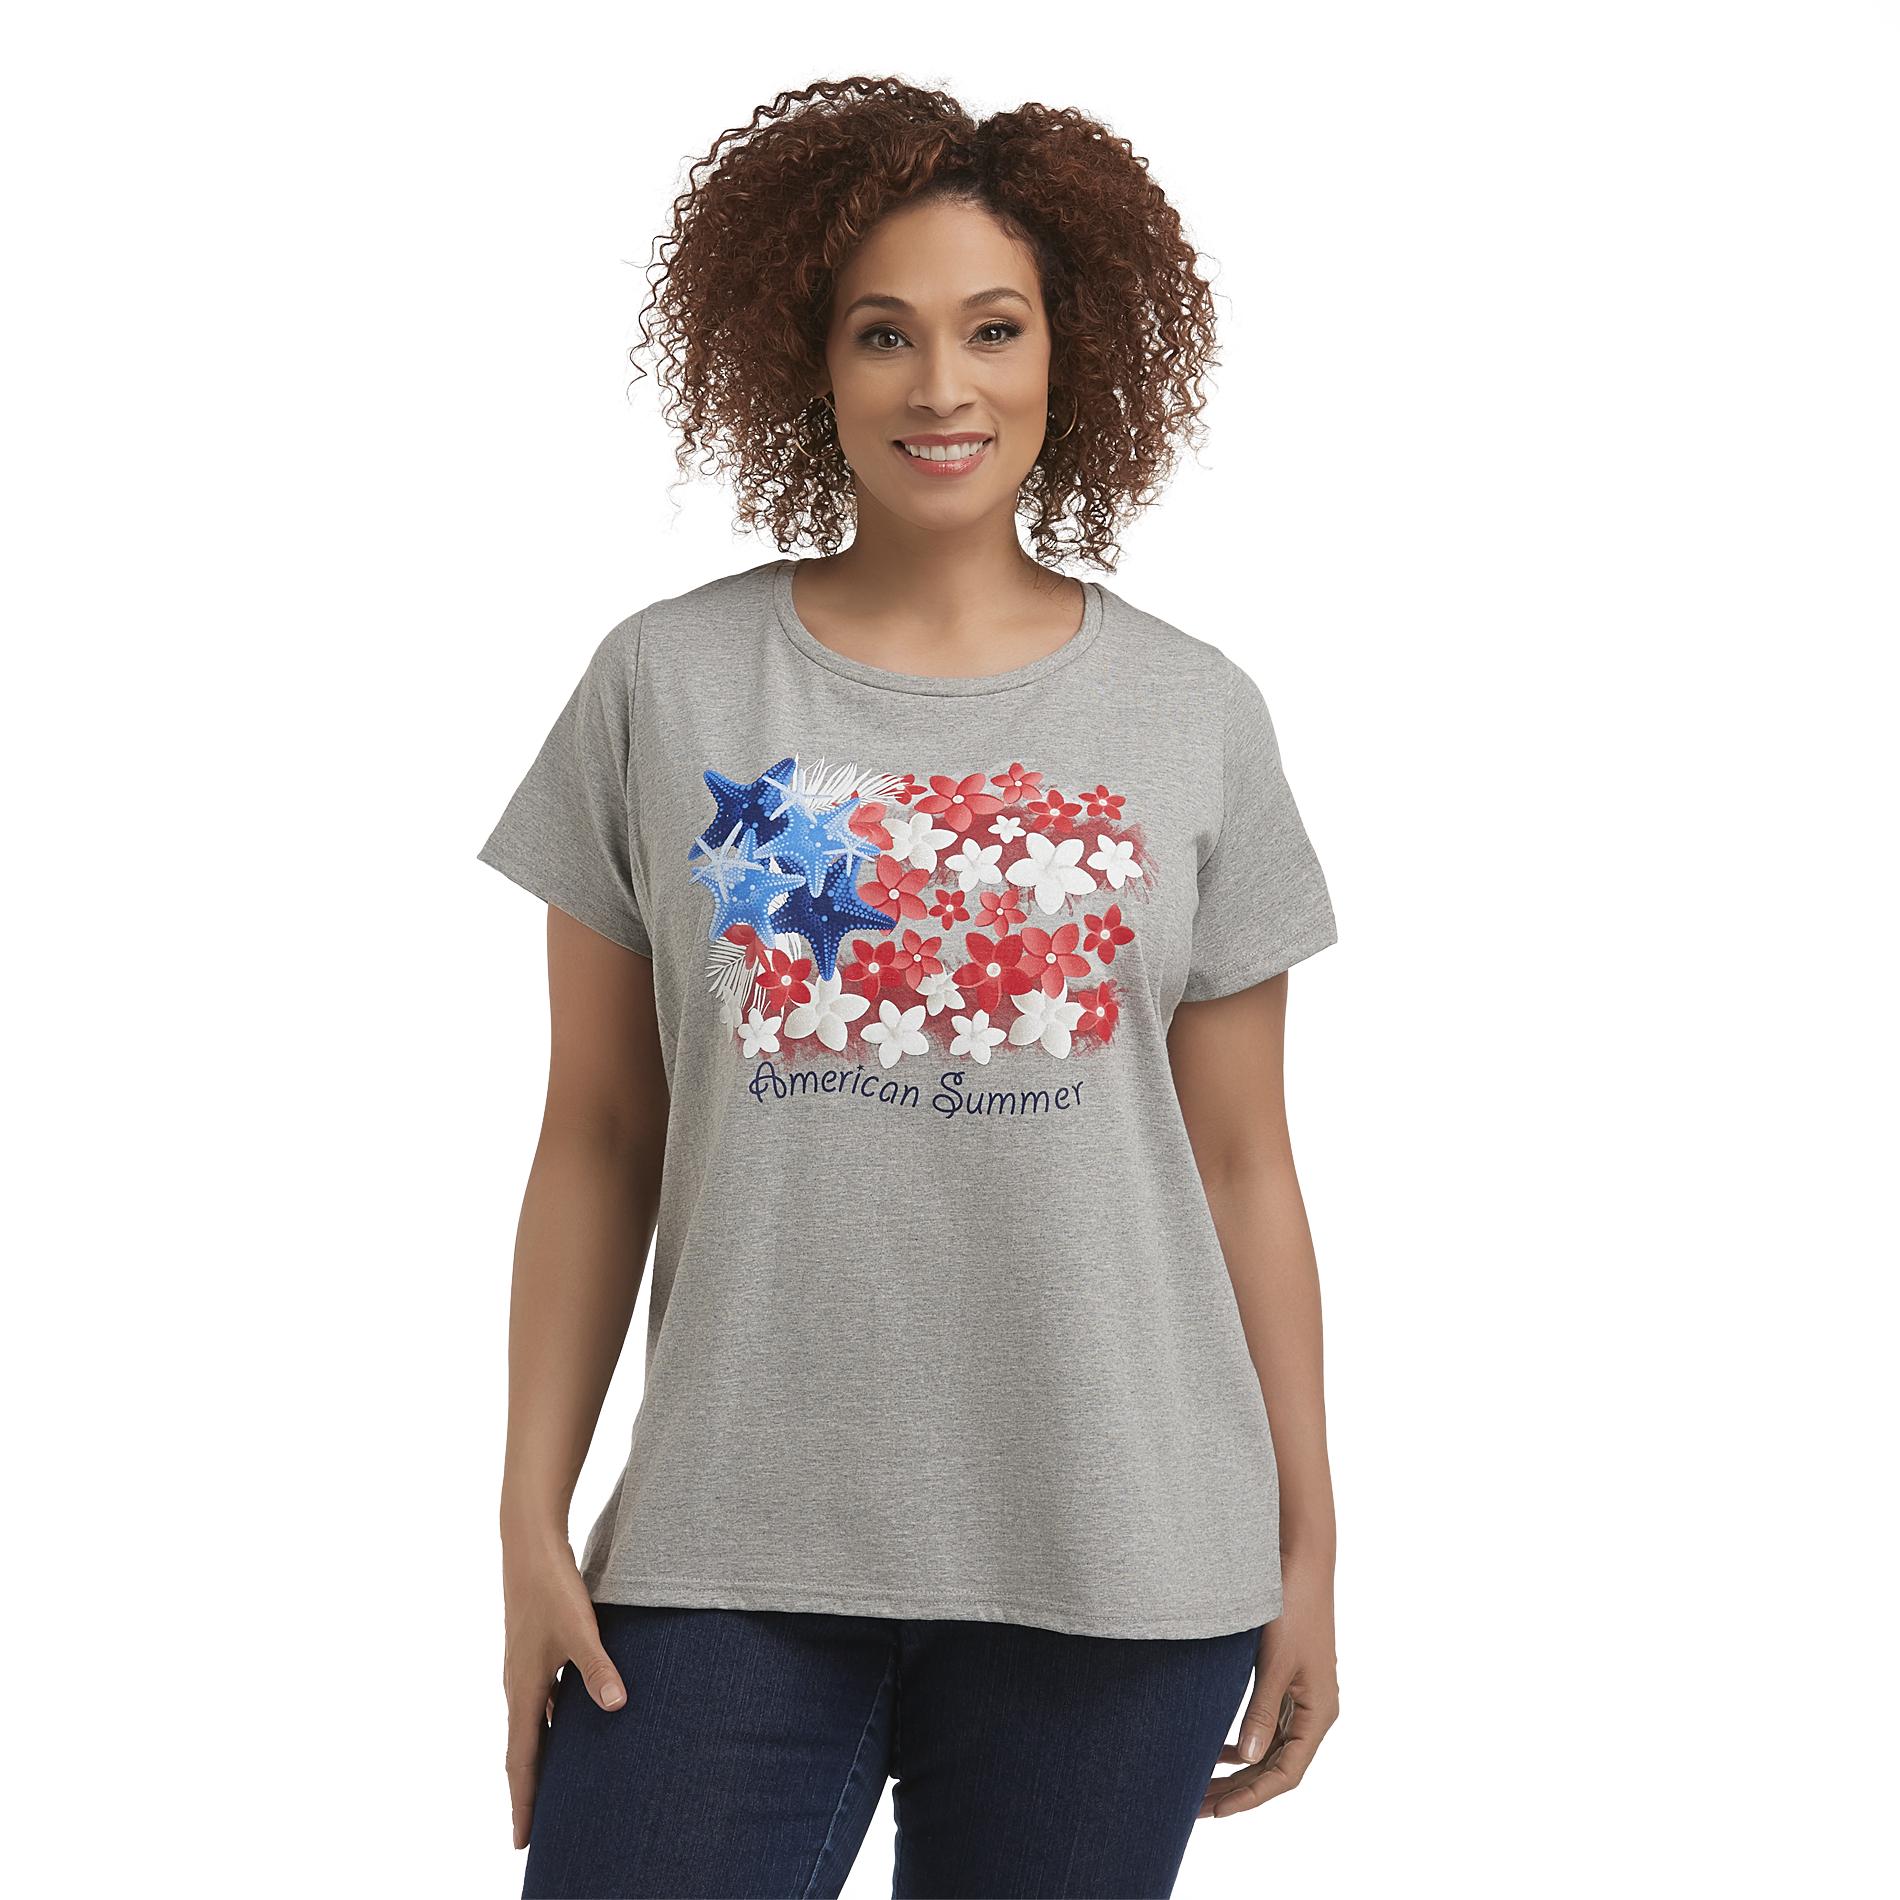 Holiday Editions Women's Plus Graphic T-Shirt - American Summer